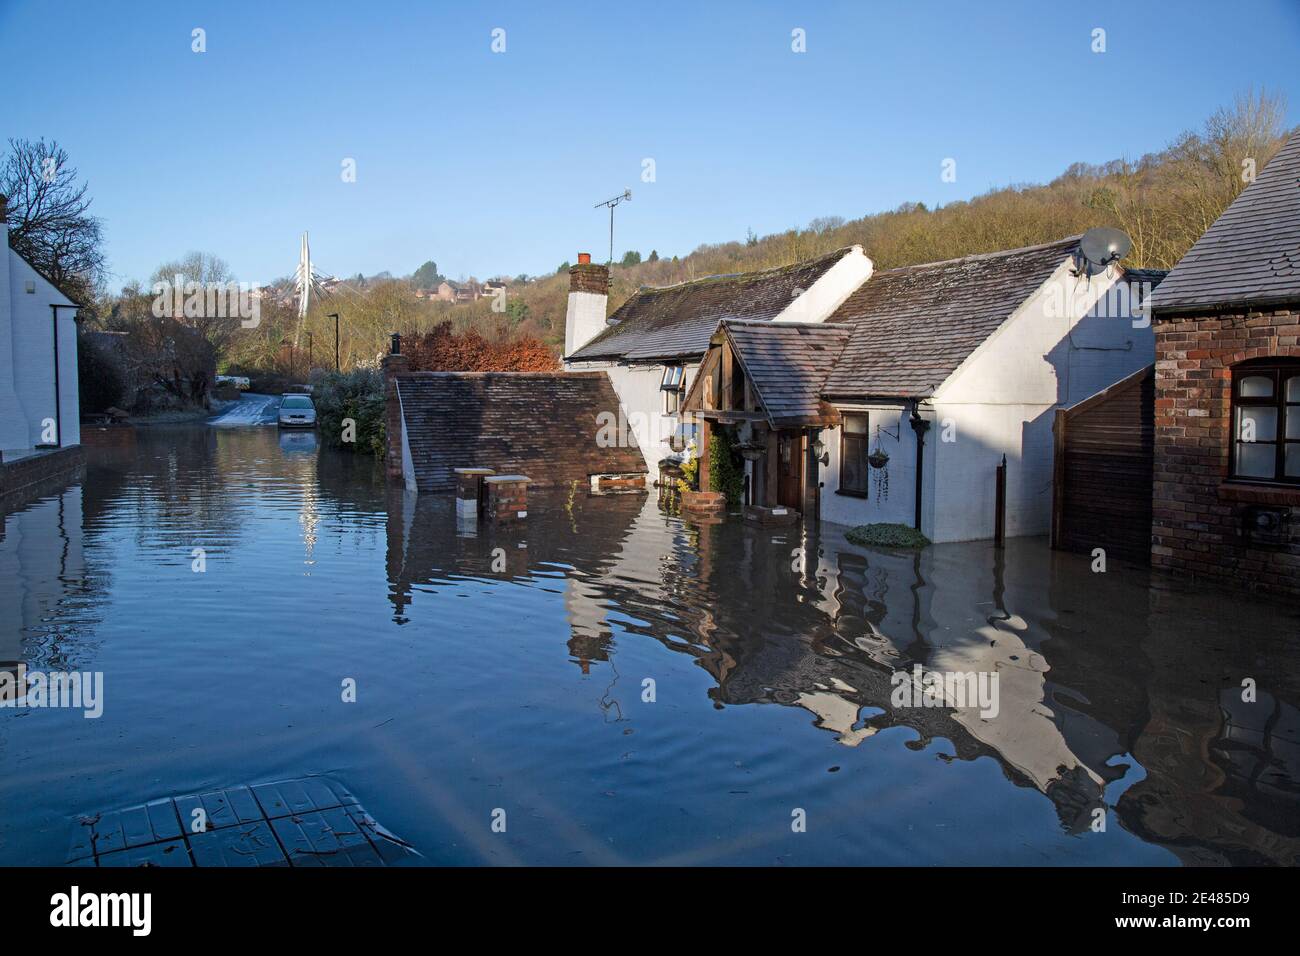 Shropshire, UK. 22nd Jan 2021. The River Severn has burst its banks along the stretch in Shropshire, flooding properties. The village of Jackfield in the Ironbridge Gorge has been particulary badly flooded. 2020 saw the worst floods in 20 years, and residents fear a repeat this winter. Credit: Rob Carter/Alamy Live News Stock Photo